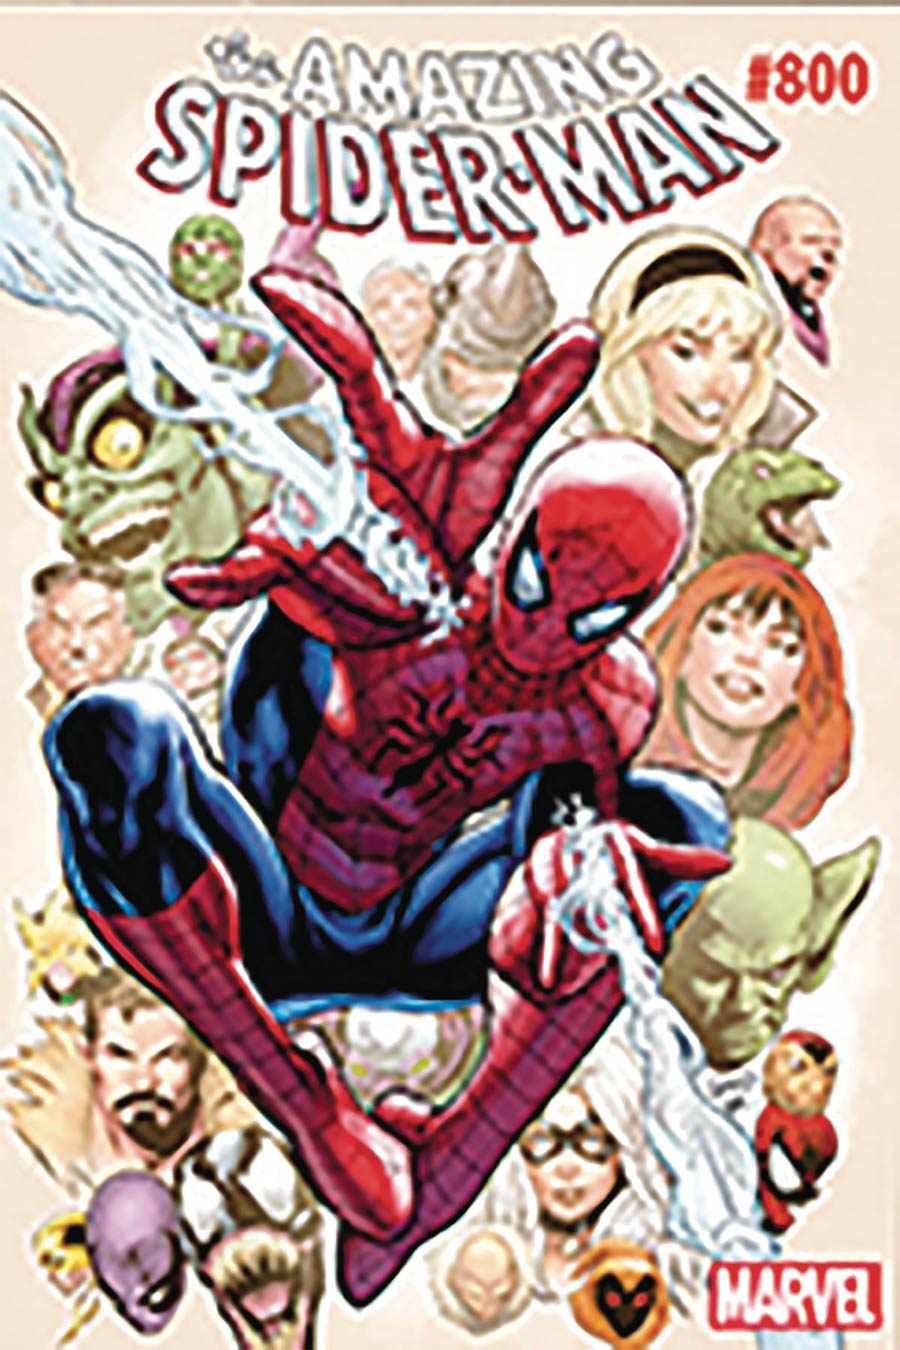 Amazing Spider-Man Vol 4 #800 Cover Z-H DF Variant Greg Land Cover Gold Signature Series Signed By Greg Land